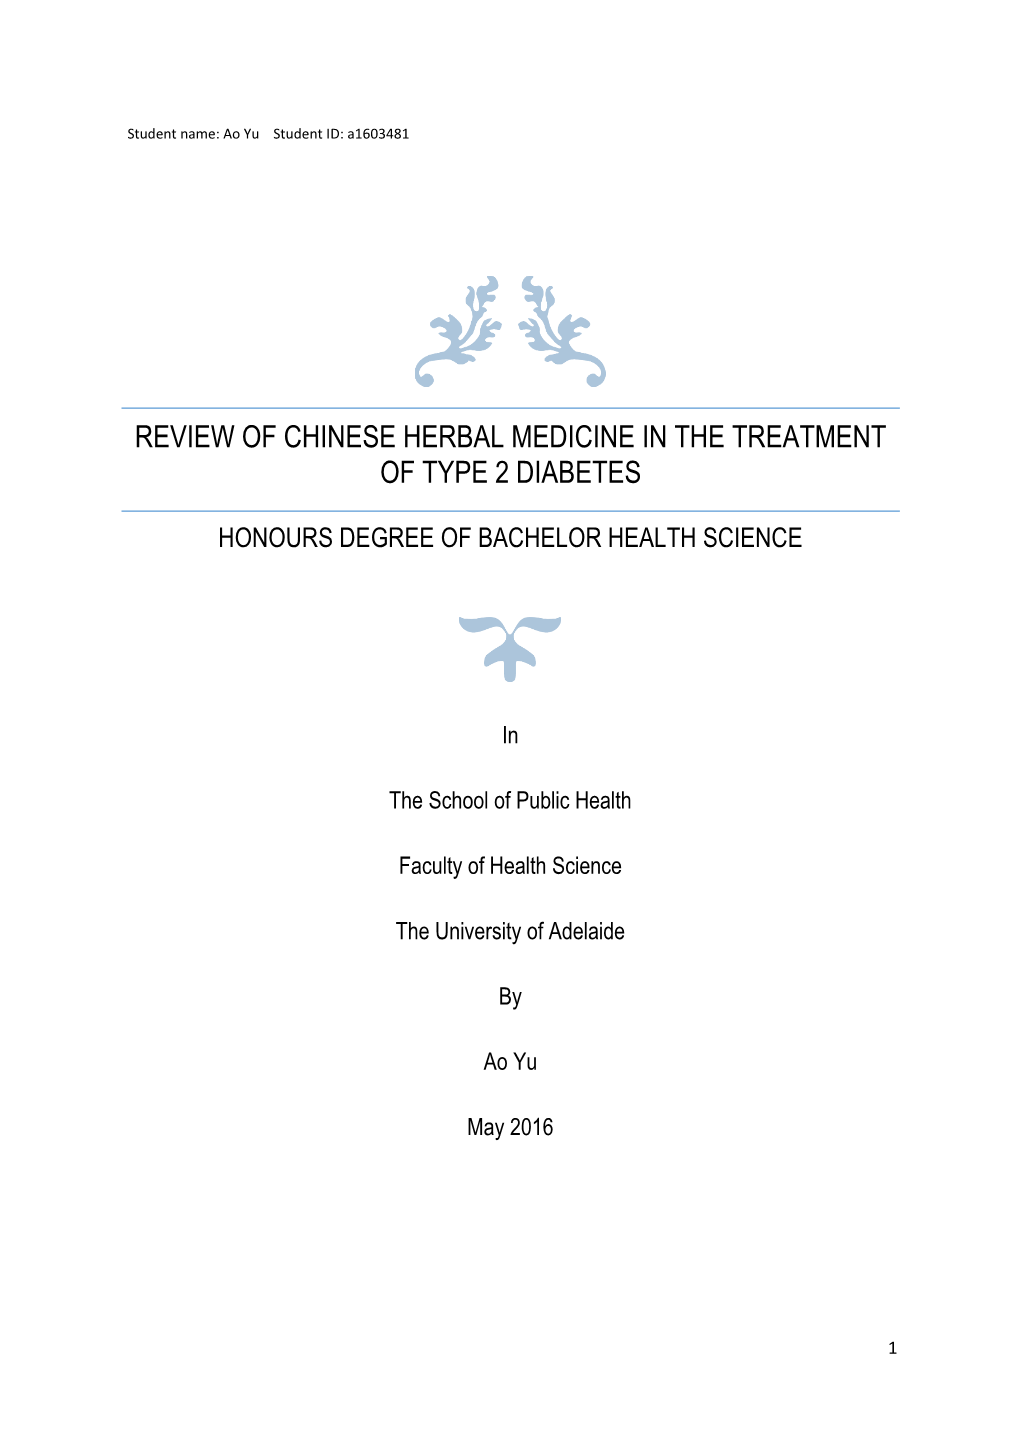 Review of Chinese Herbal Medicine in the Treatment of Type 2 Diabetes